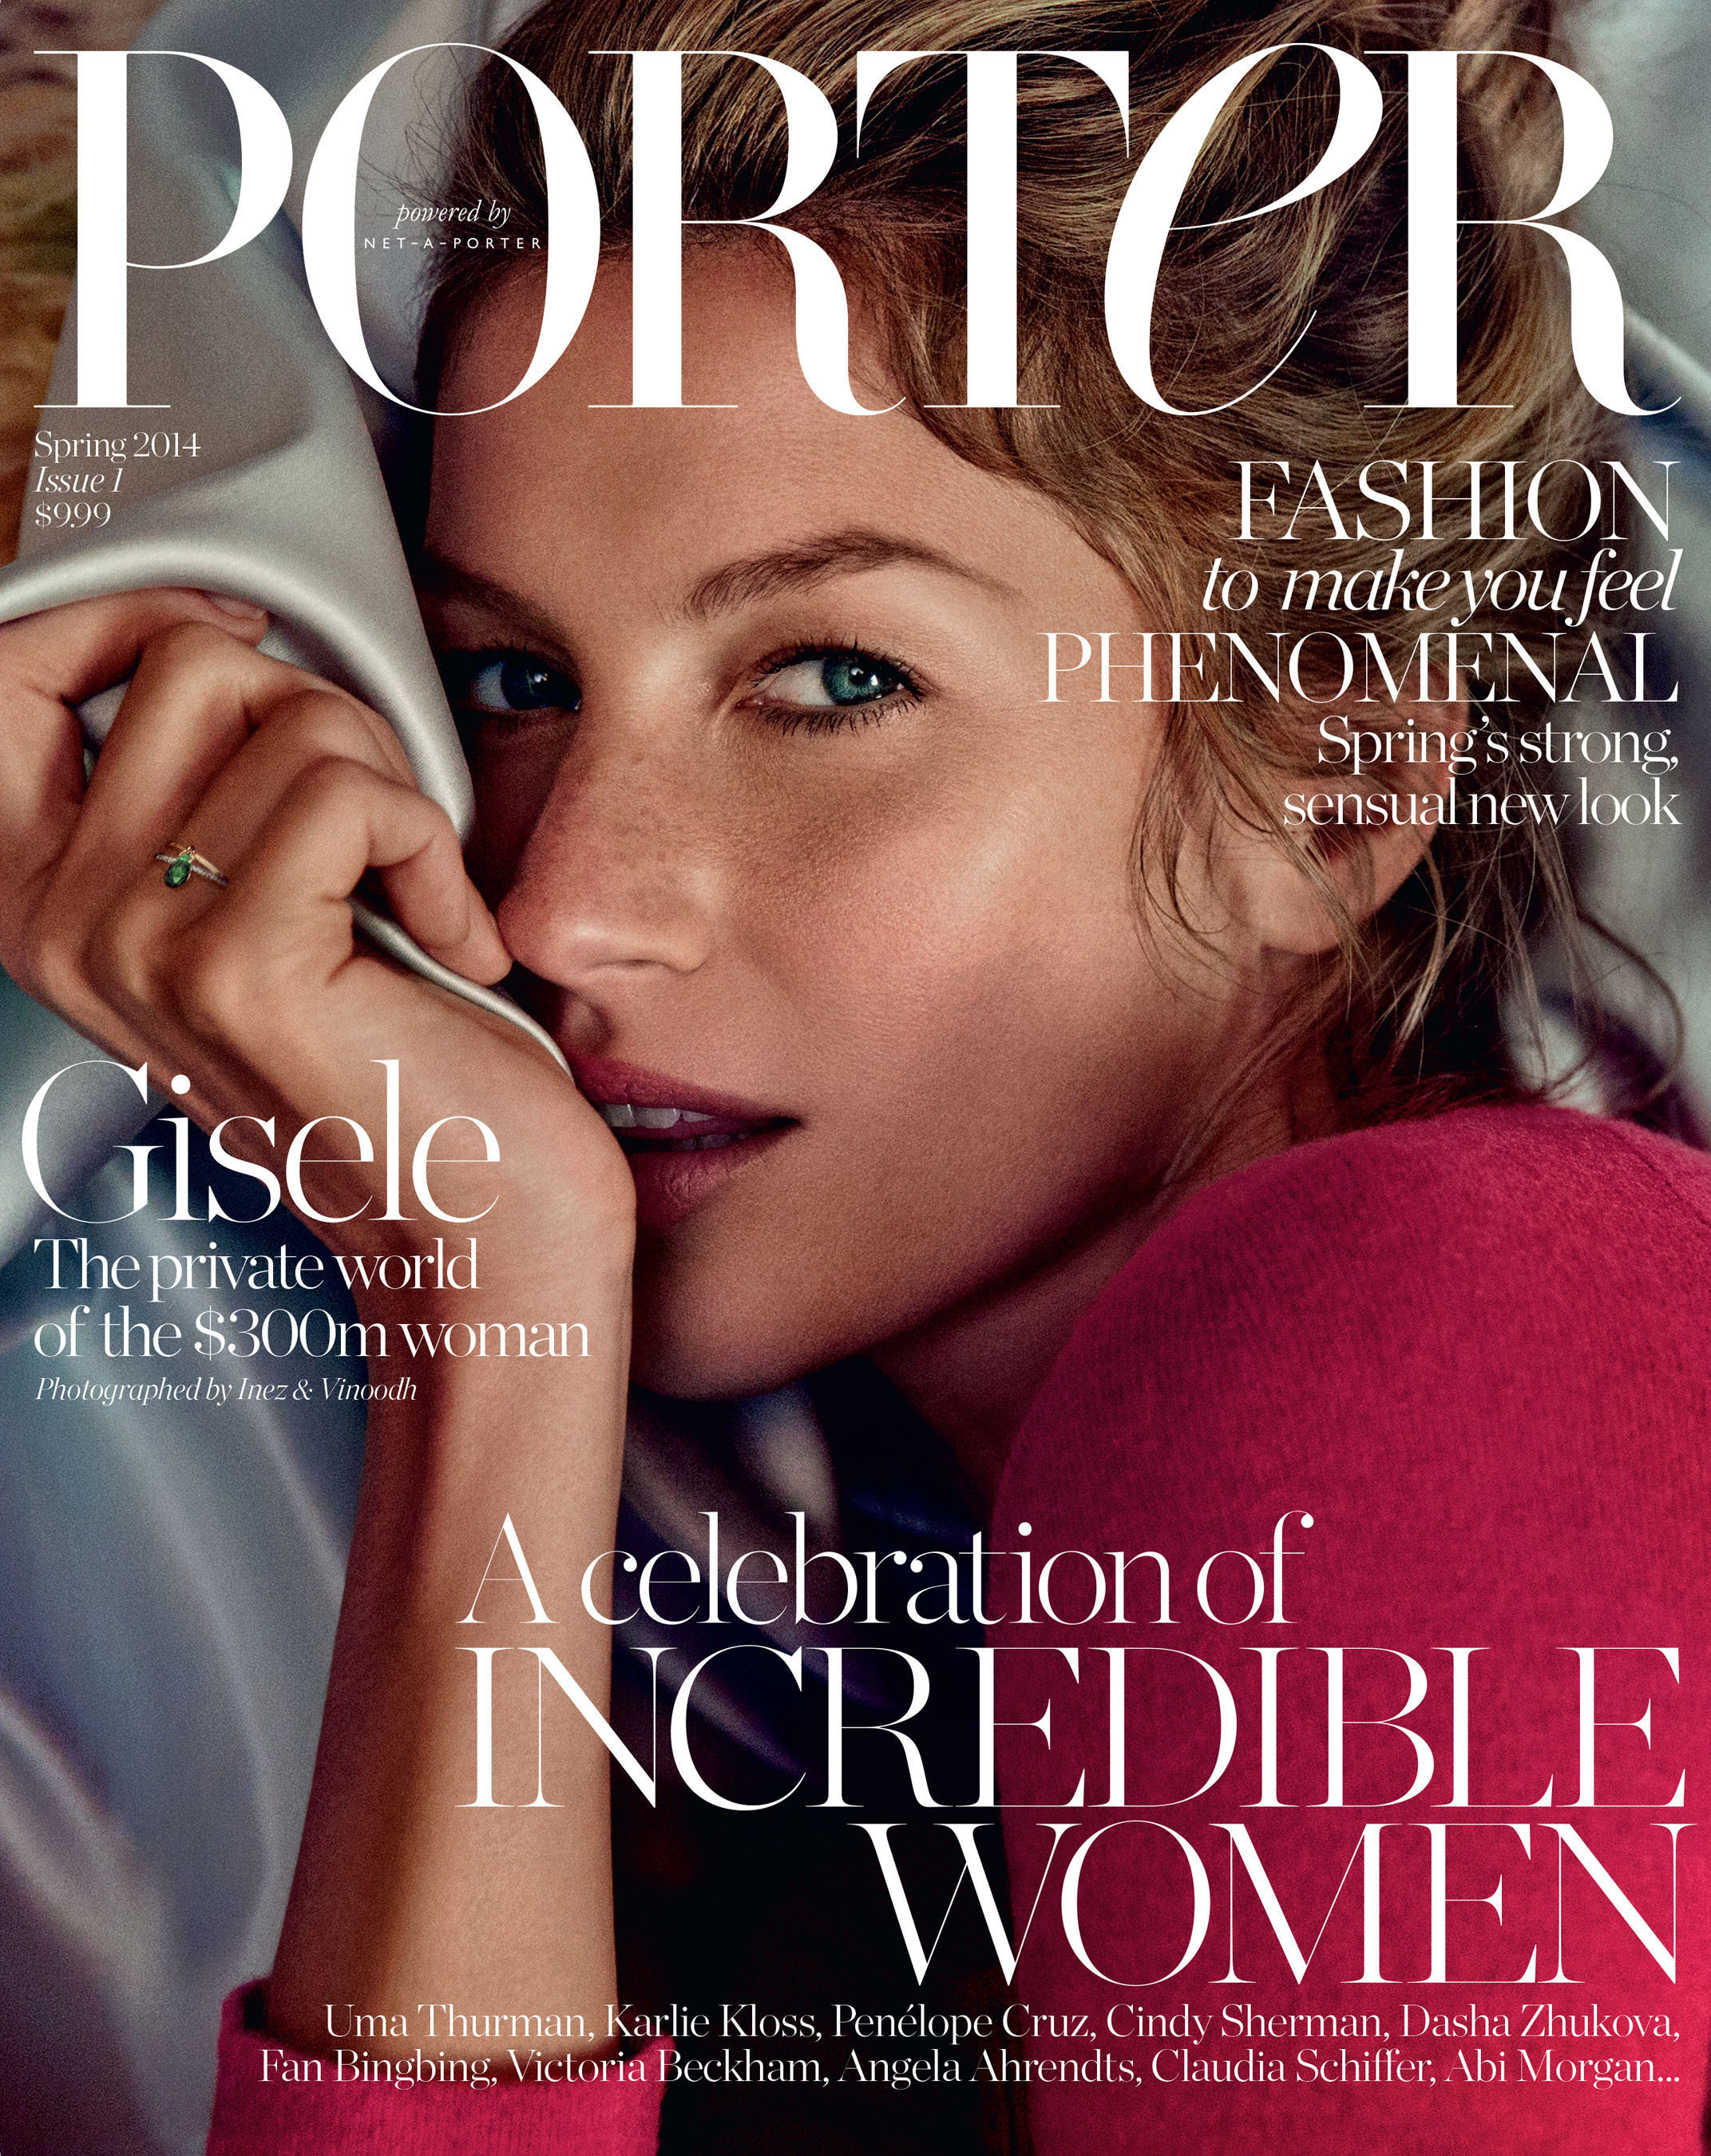 The first issue of PORTER featuring Gisele Bundchen on the cover is available at newsstands globally and via NET-A-PORTER.COM starting February 7. (PRNewsFoto/The NET-A-PORTER Group) (PRNewsFoto/THE NET-A-PORTER GROUP)